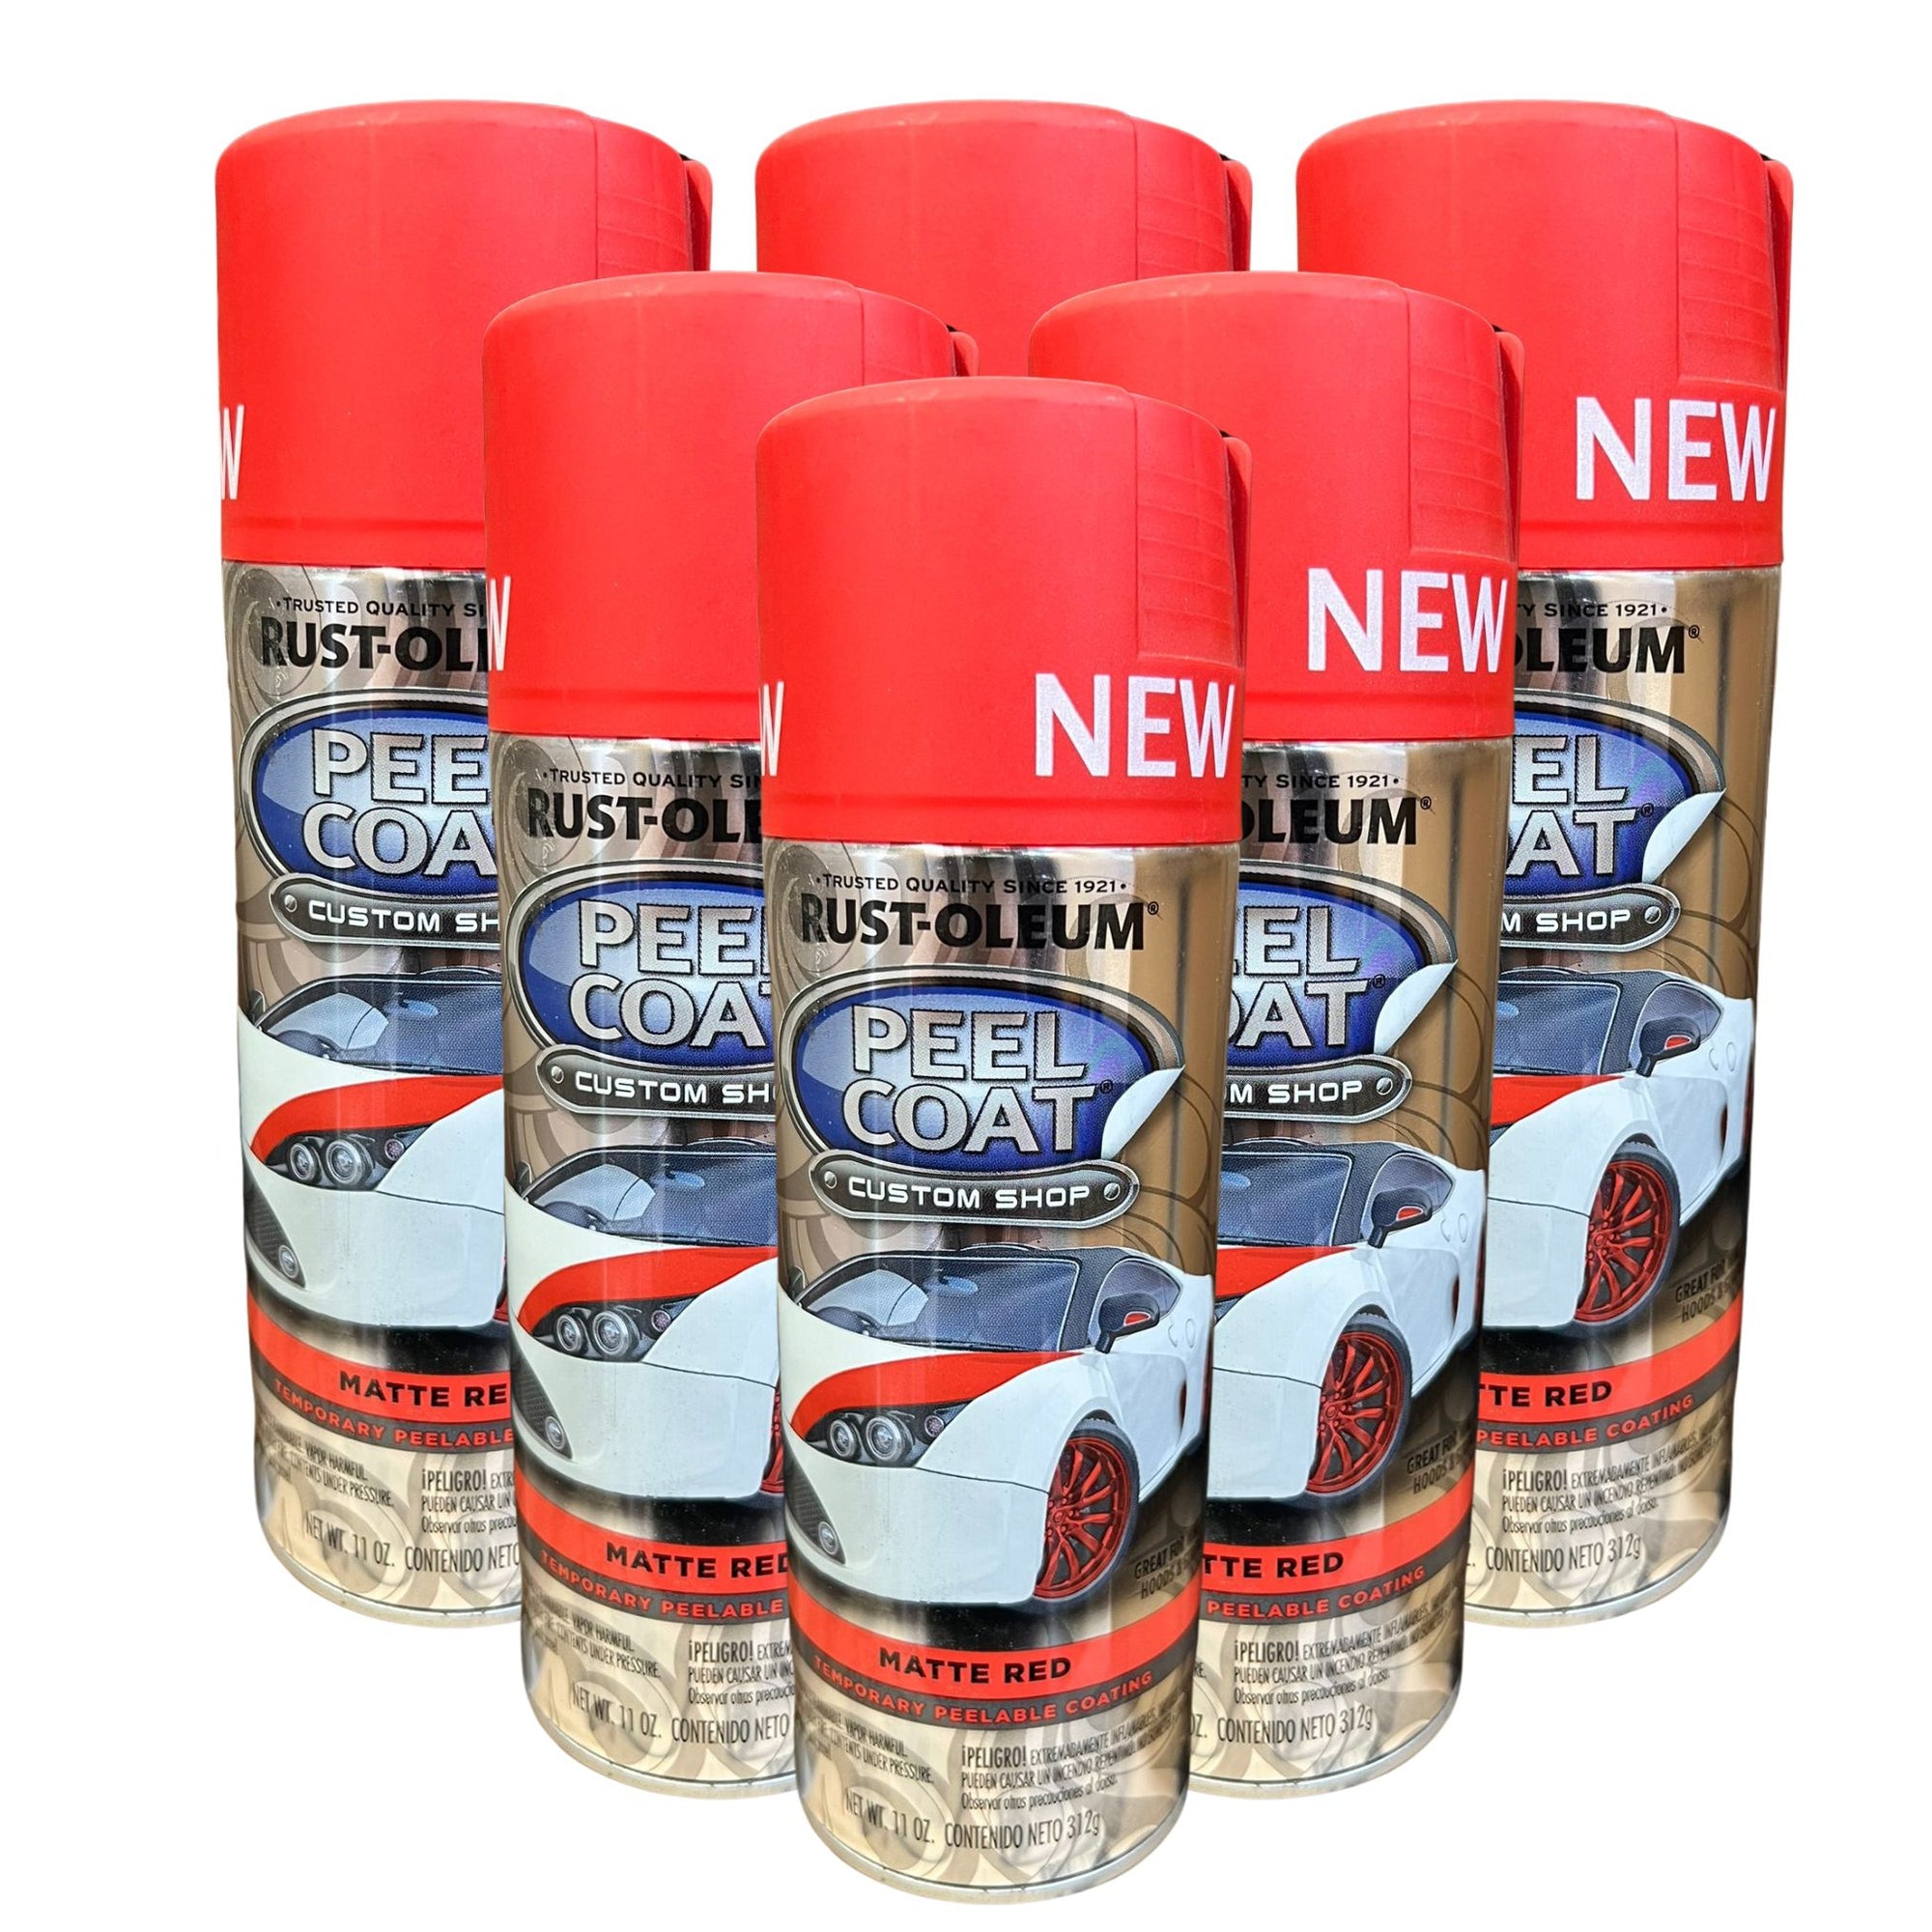 Rust-Oleum Peel Coat Rubberized Removable Coating - Matte Red - 6 Pack - South East Clearance Centre